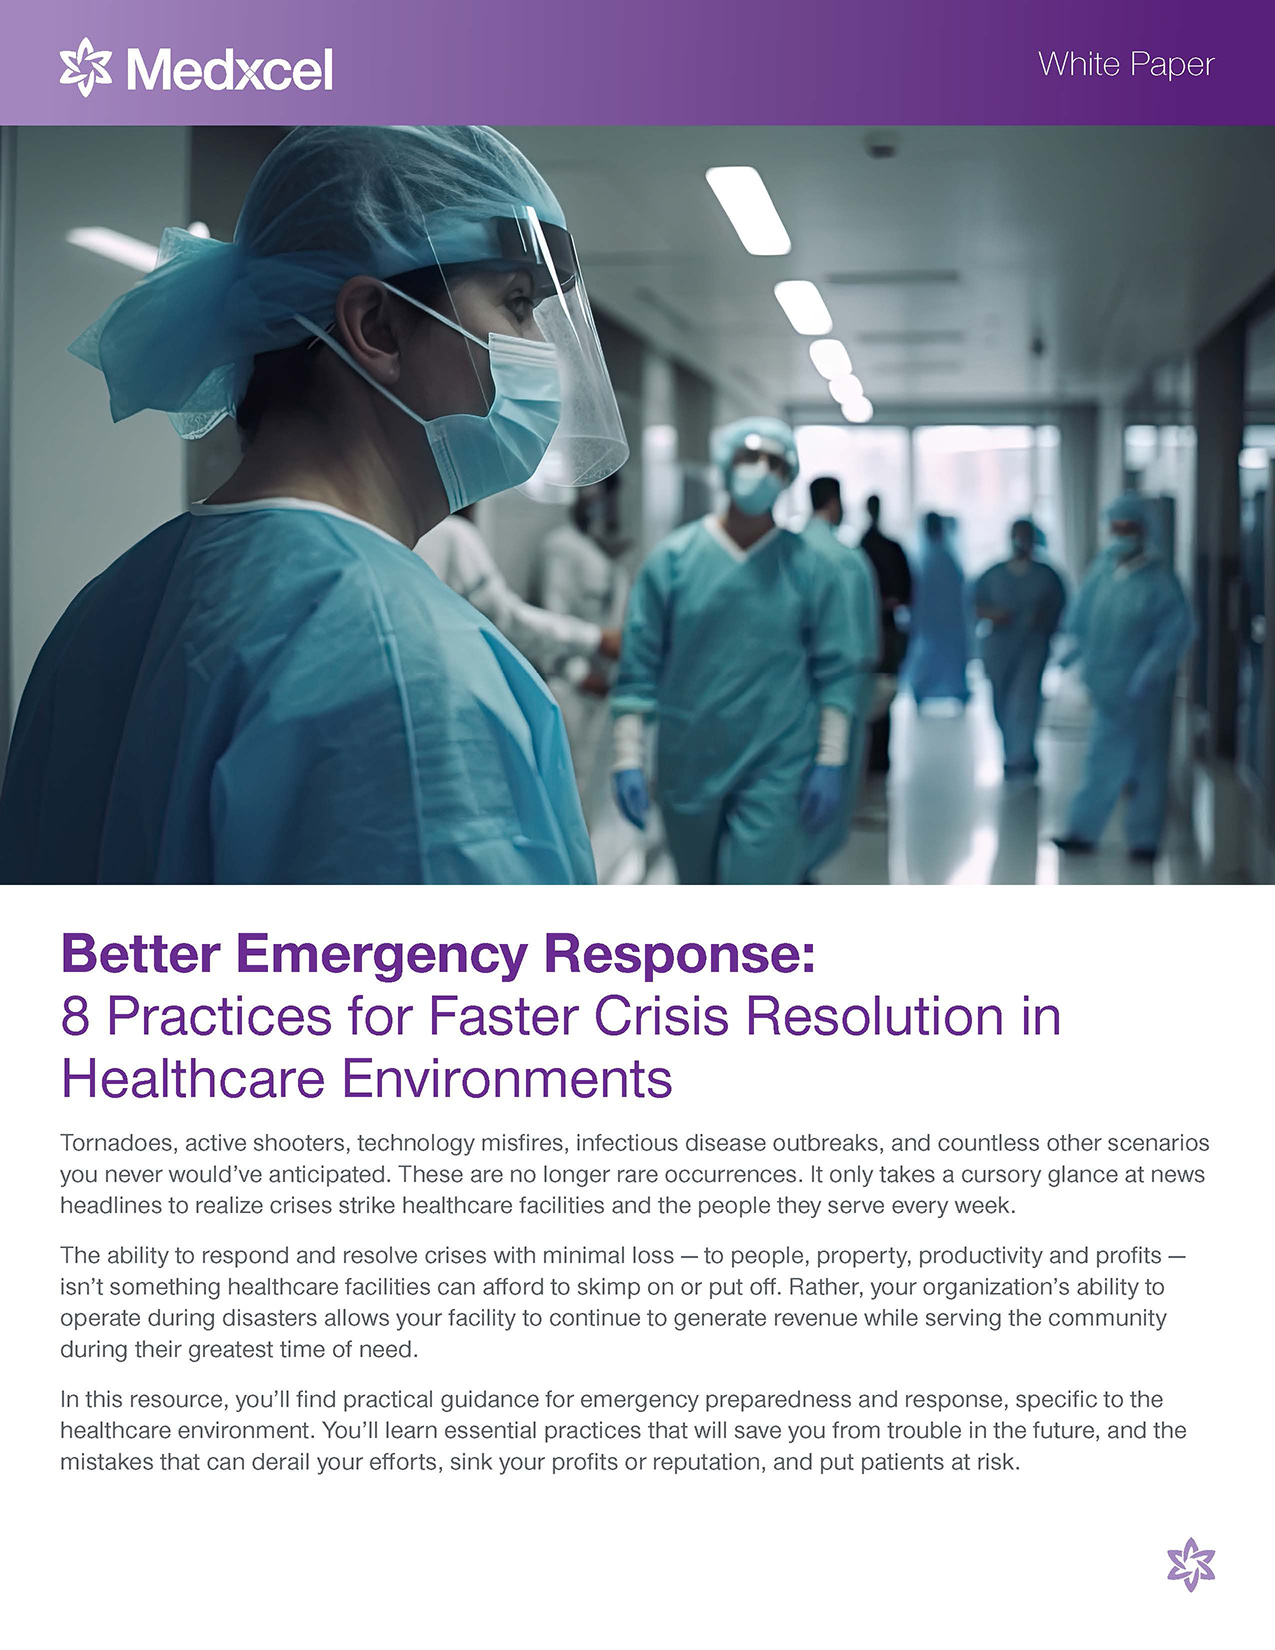 Download Better Emergency Response: 8 Practices For Faster Crisis Resolution in Healthcare Environments Whitepaper